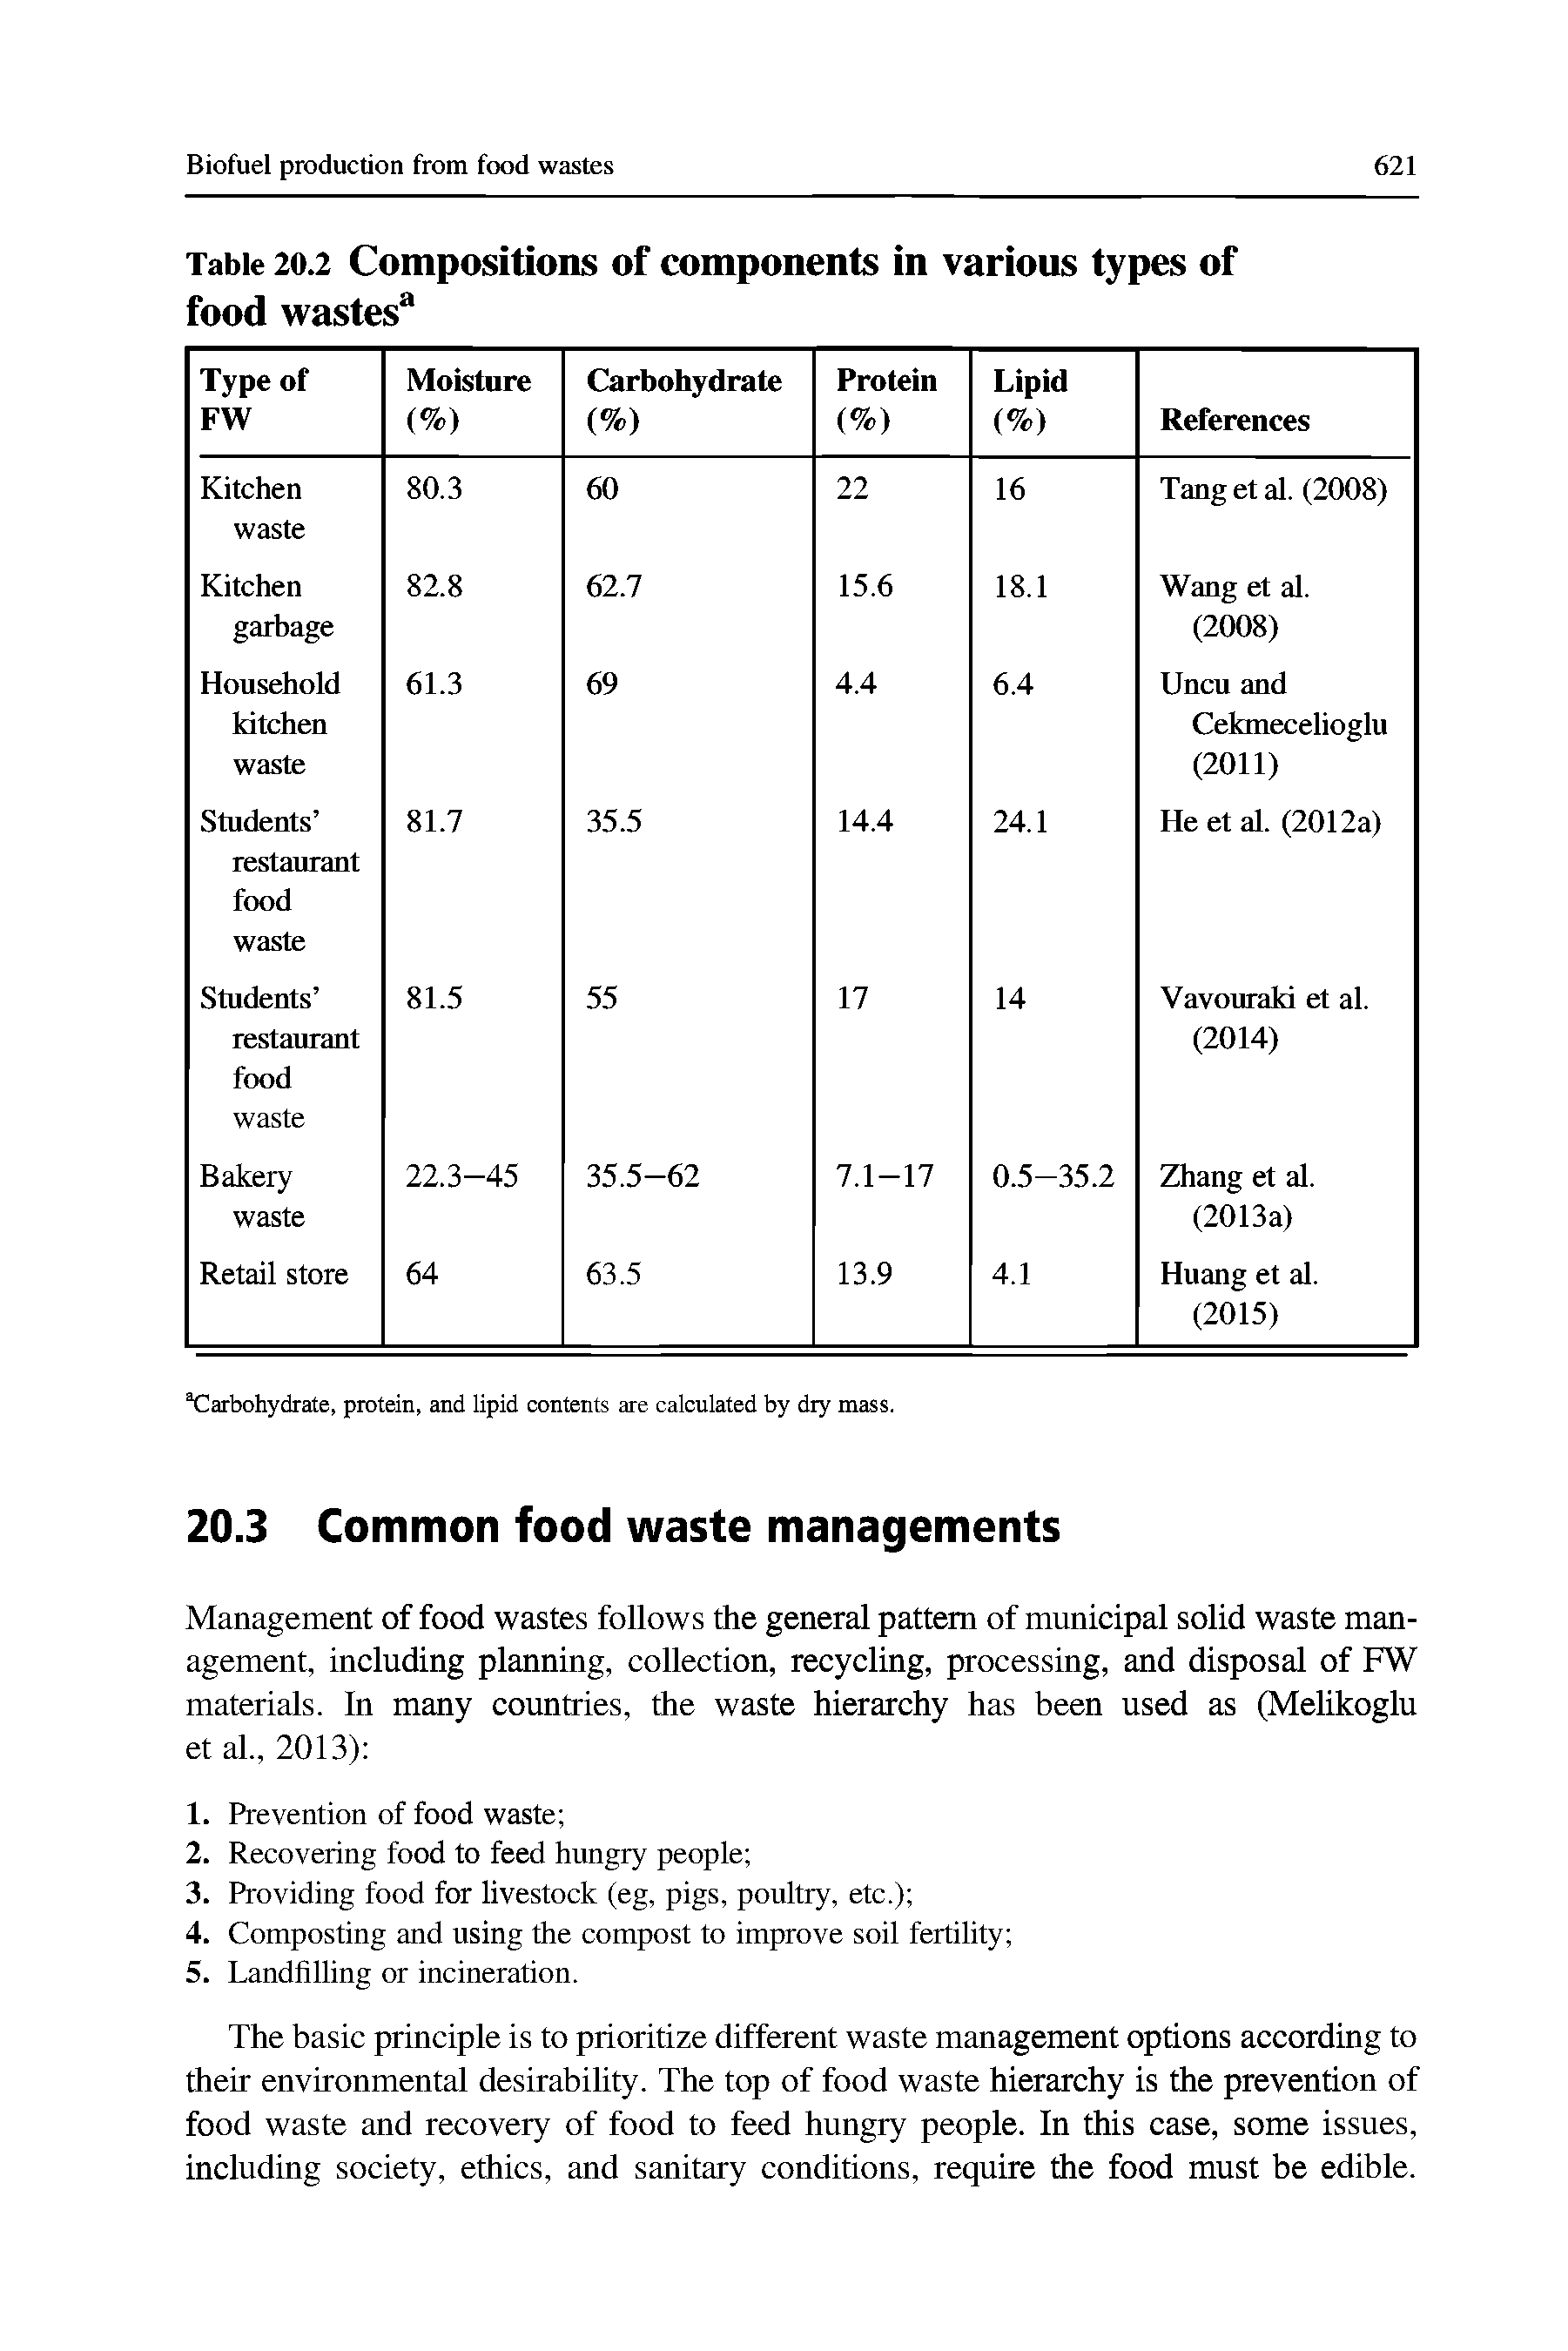 Table 20.2 Compositions of components in various types of food wastes ...